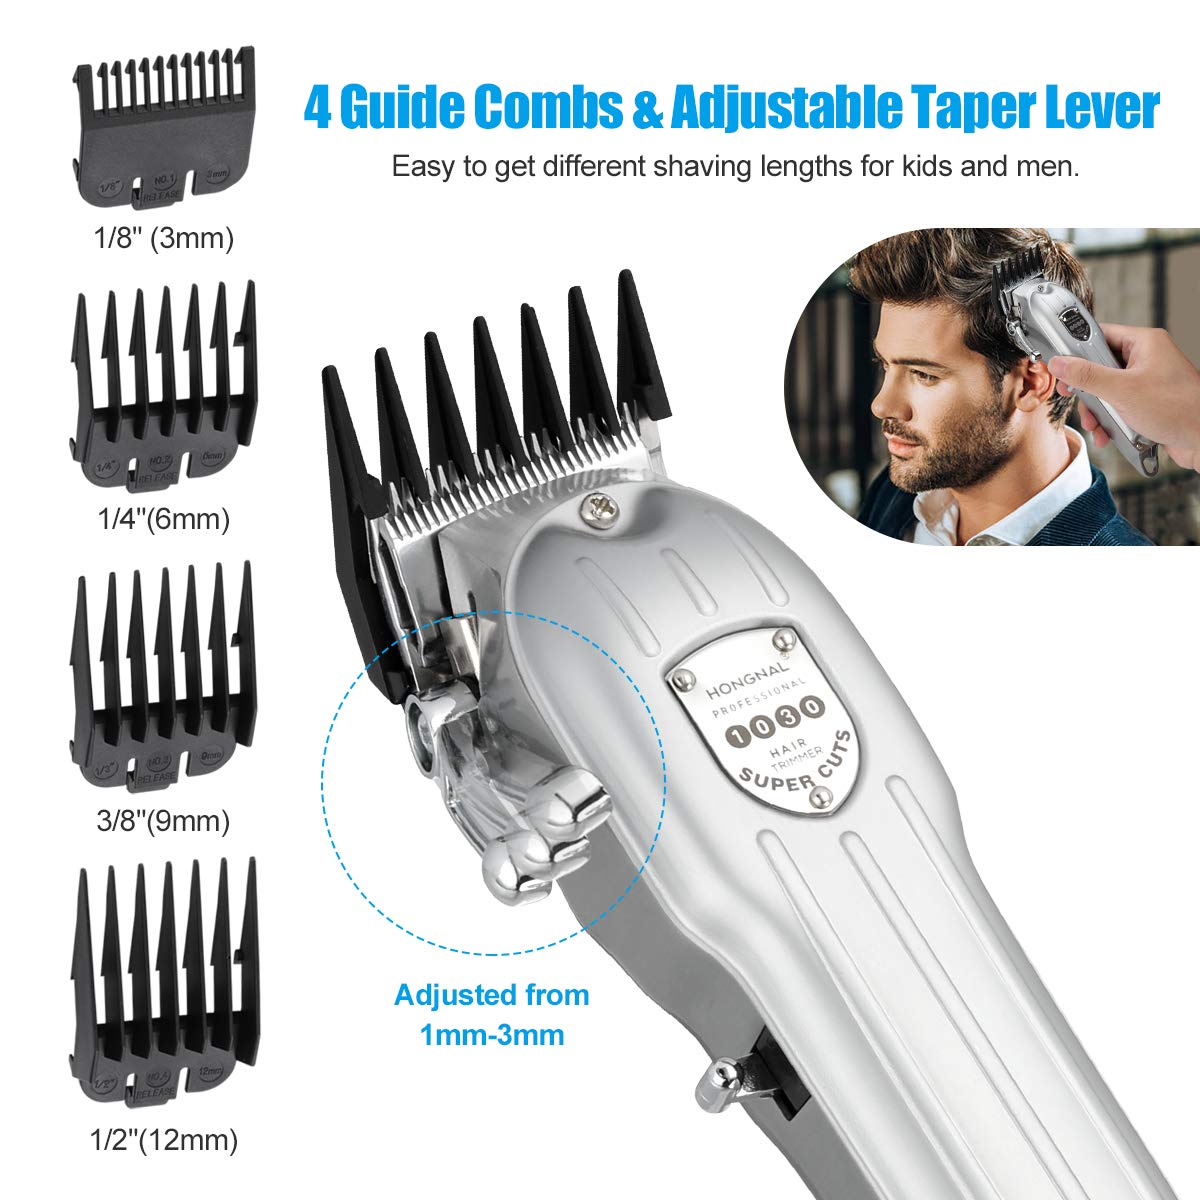 3600mAh Cordless Hair Clippers Stainless Steel Housing - 2 